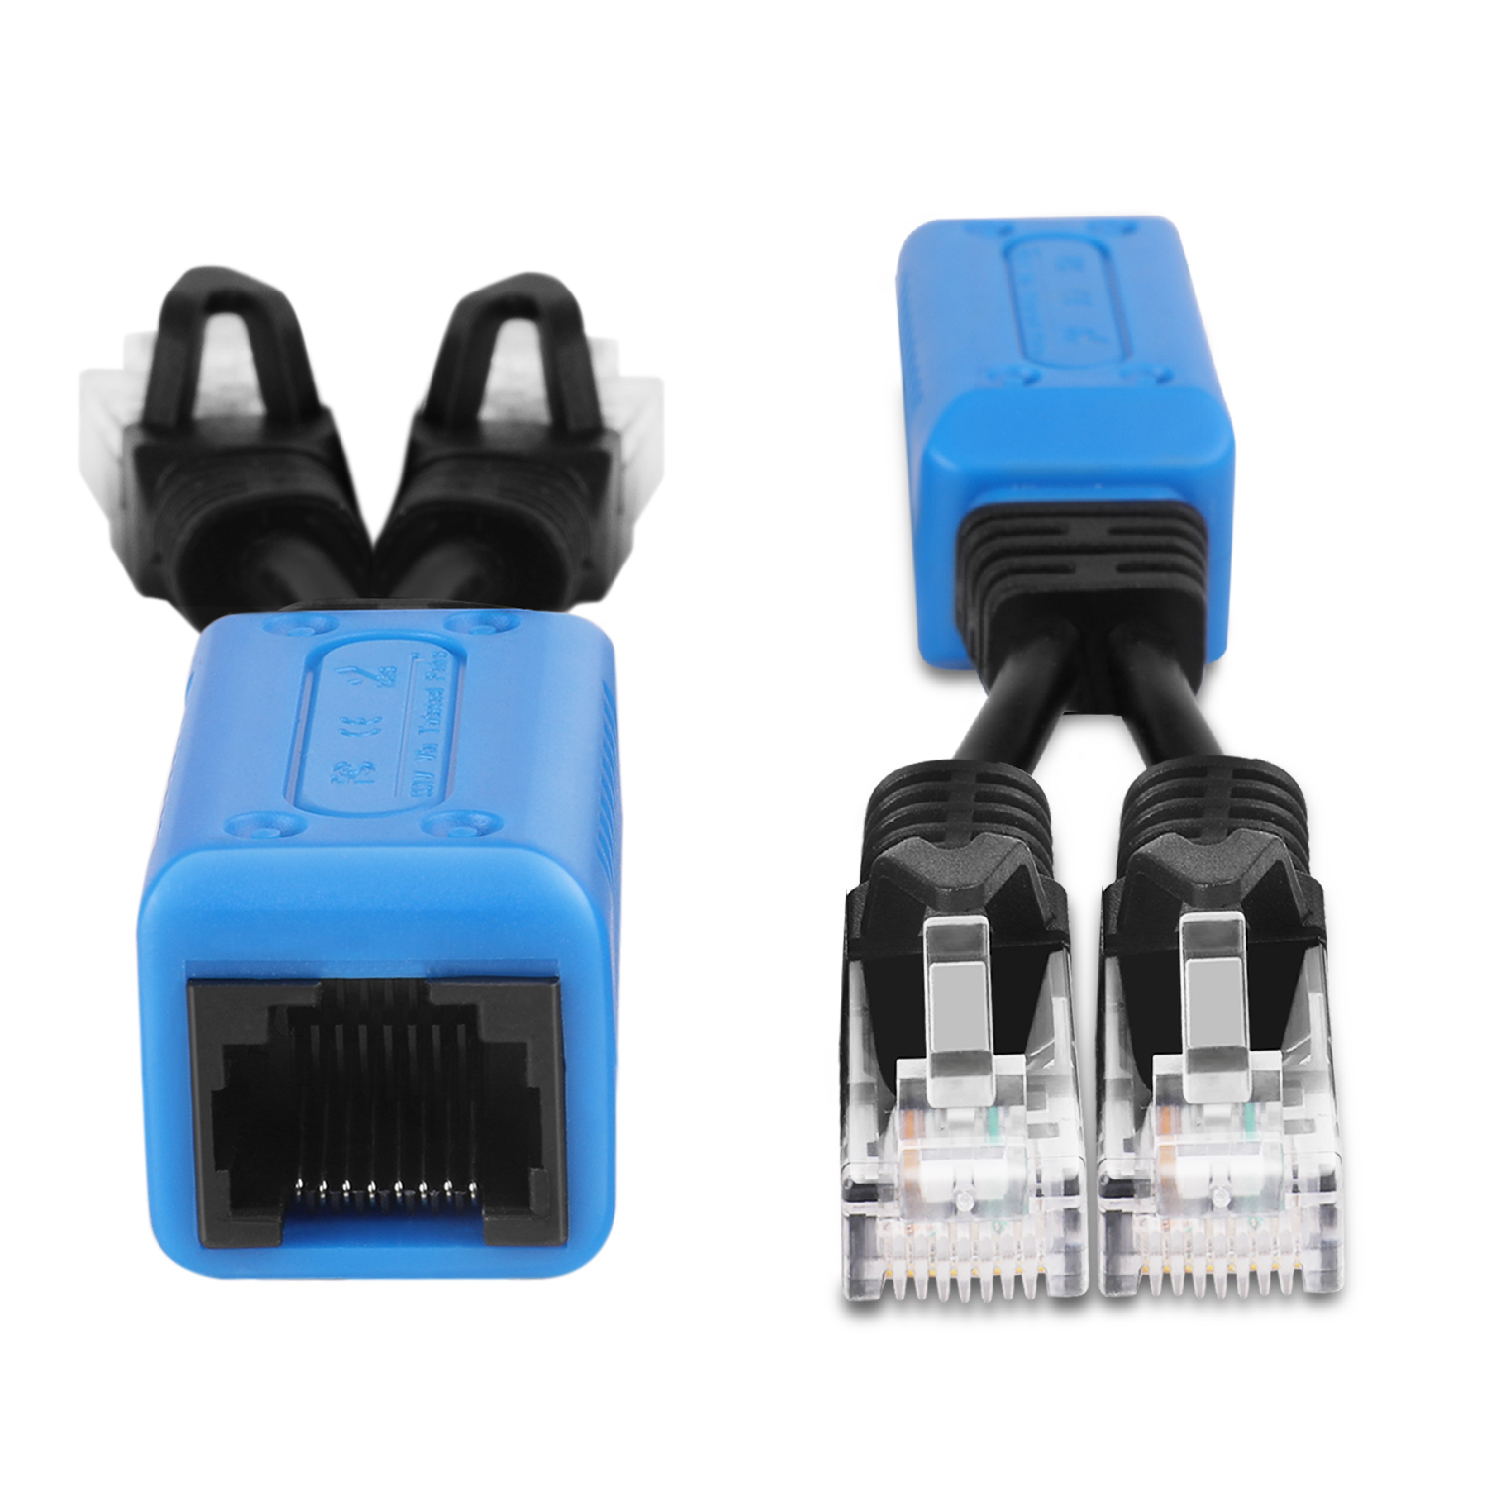 RJ45 Ethernet Cable Combiner / Splitter Kit (1 Pair) - 2 Male to 1 Female POE Data Adapter LAN Ethernet Network Extender Y Splitter Cat5 Cat5e Cat6 UPOE Cable for Surveillance Security Monitoring - image 4 of 7